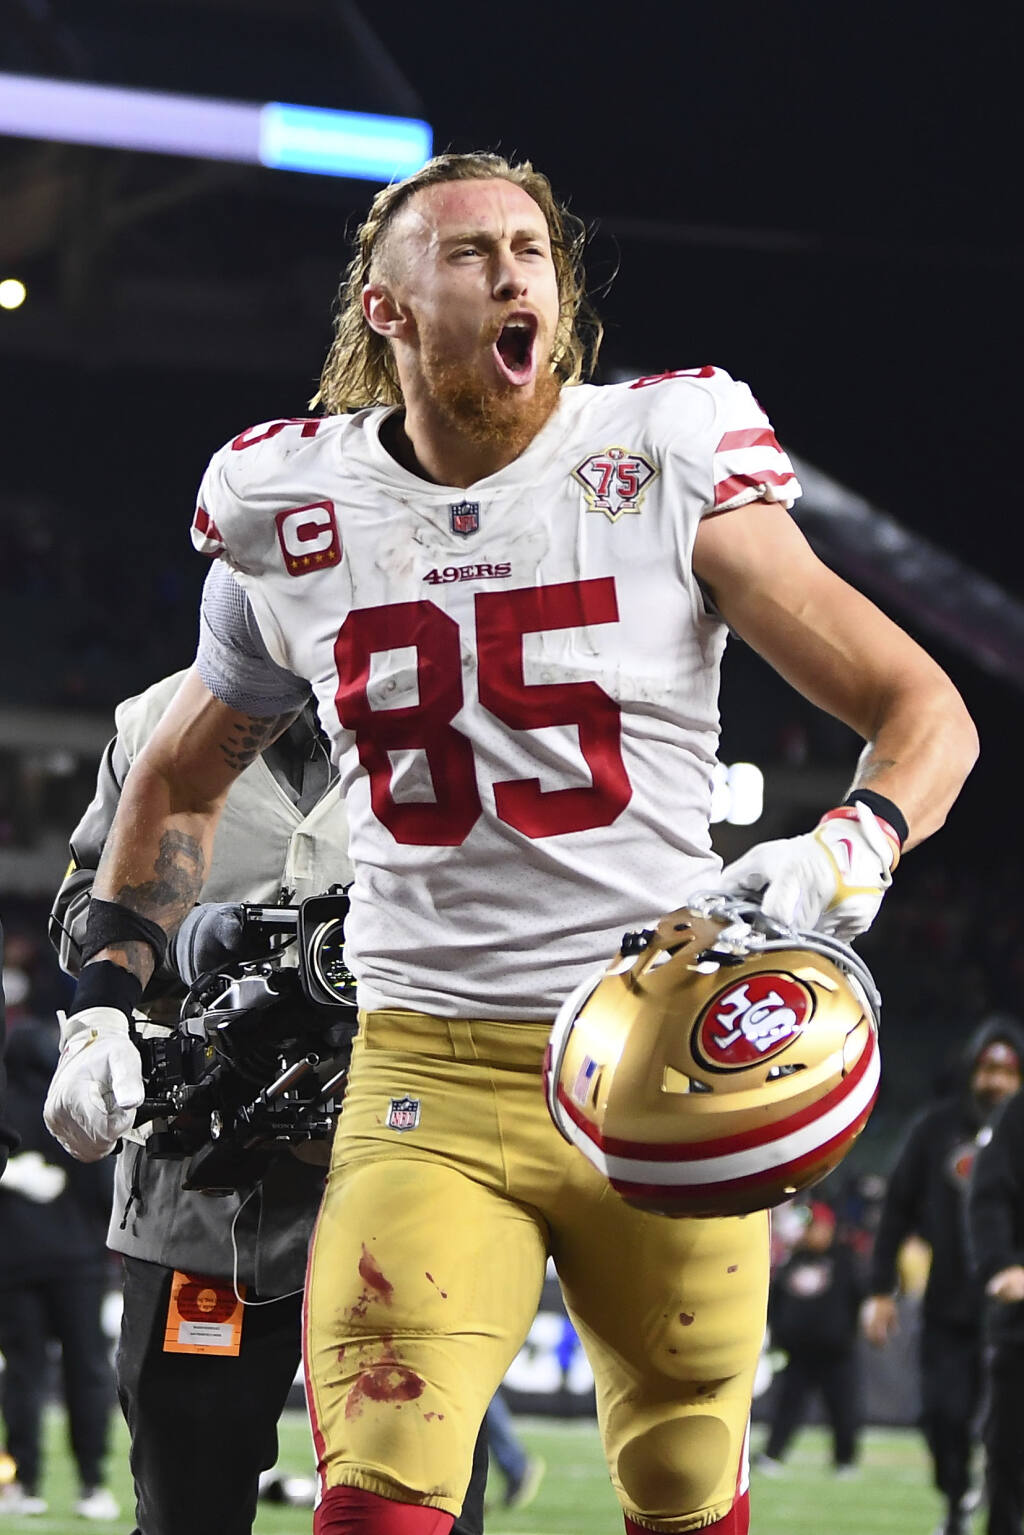 kittle from 49ers